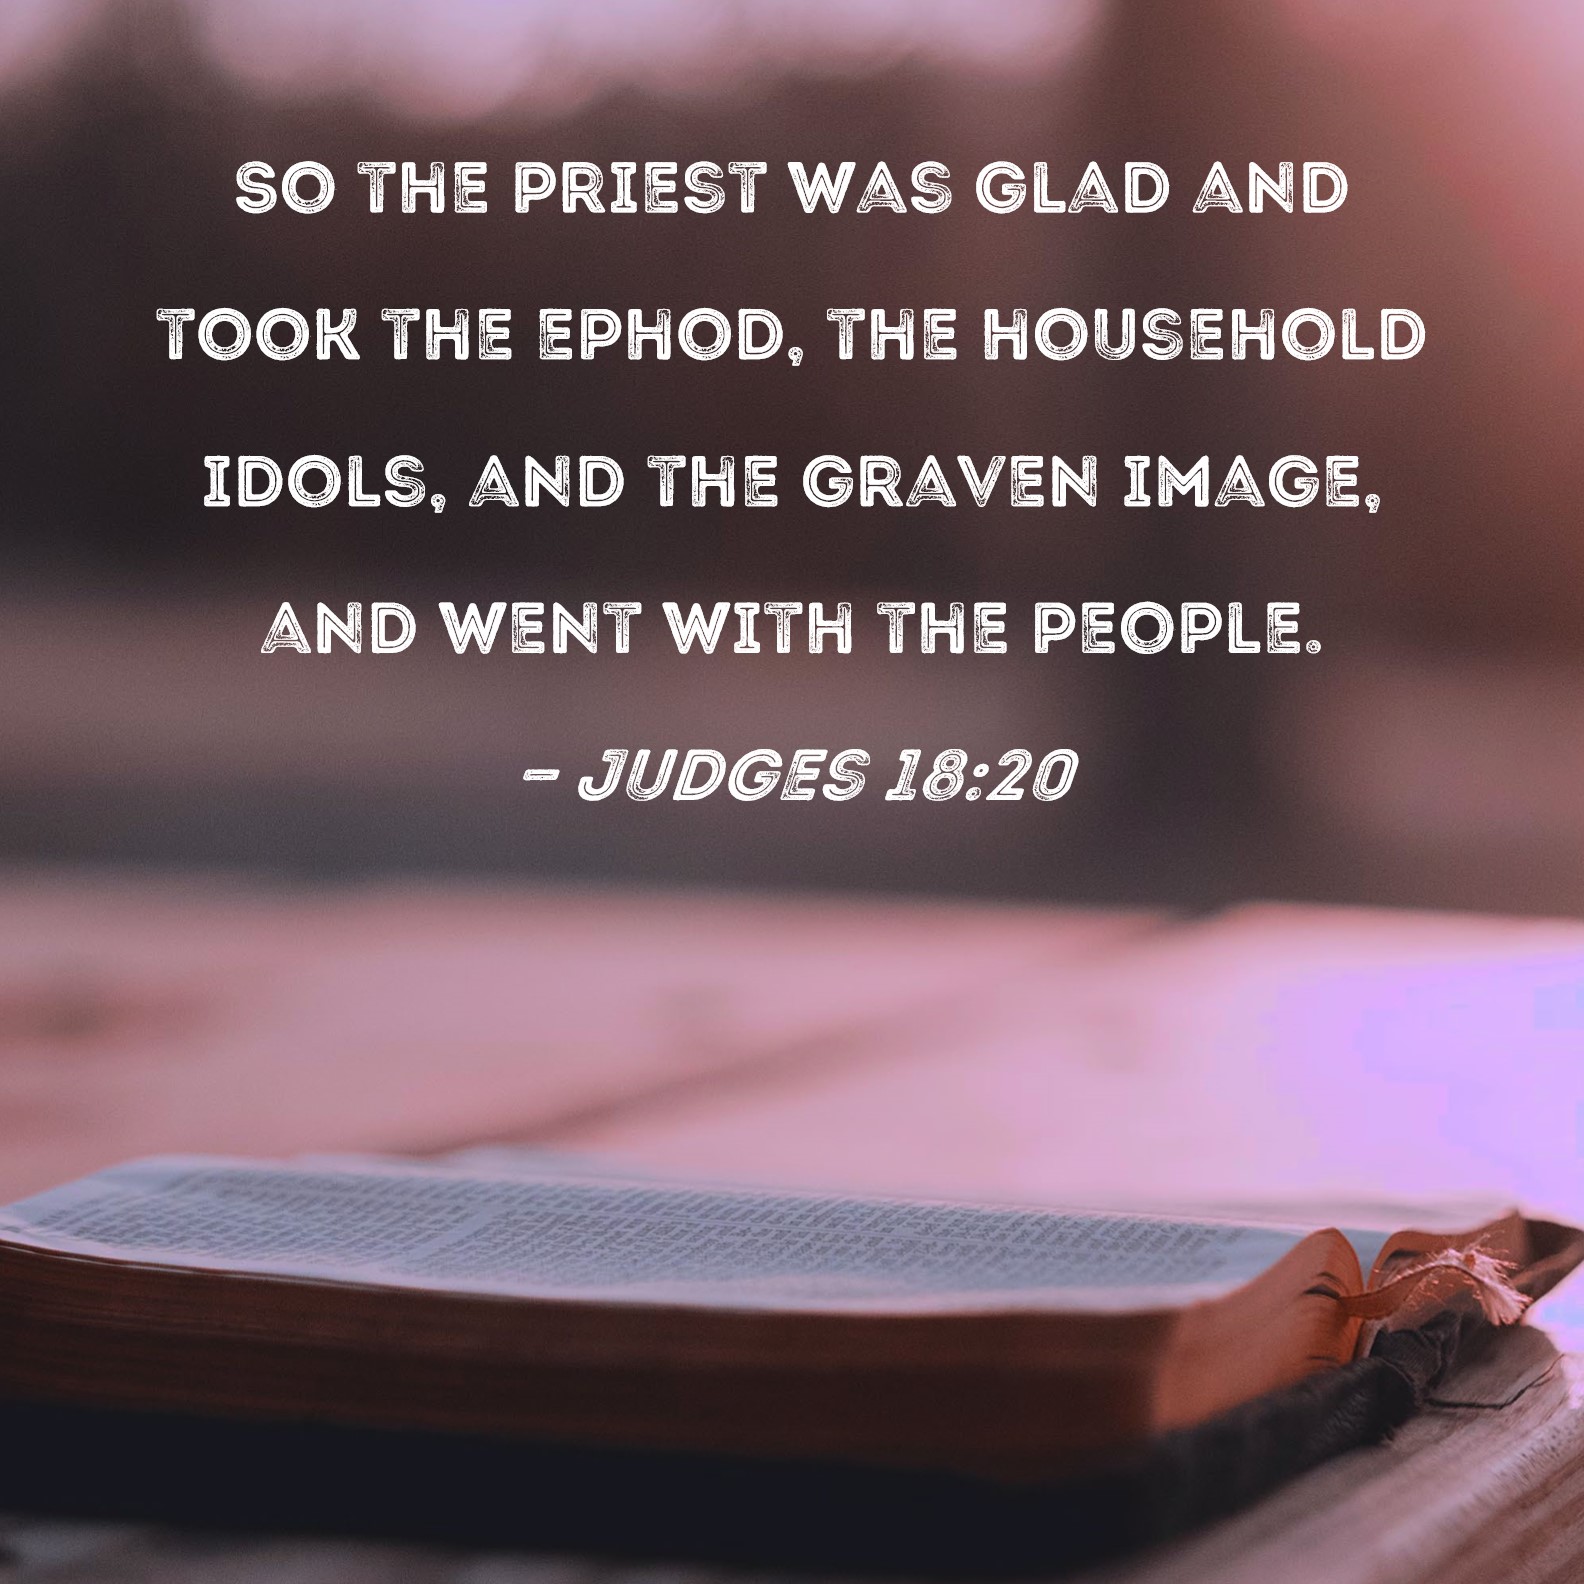 Judges 20 commentary